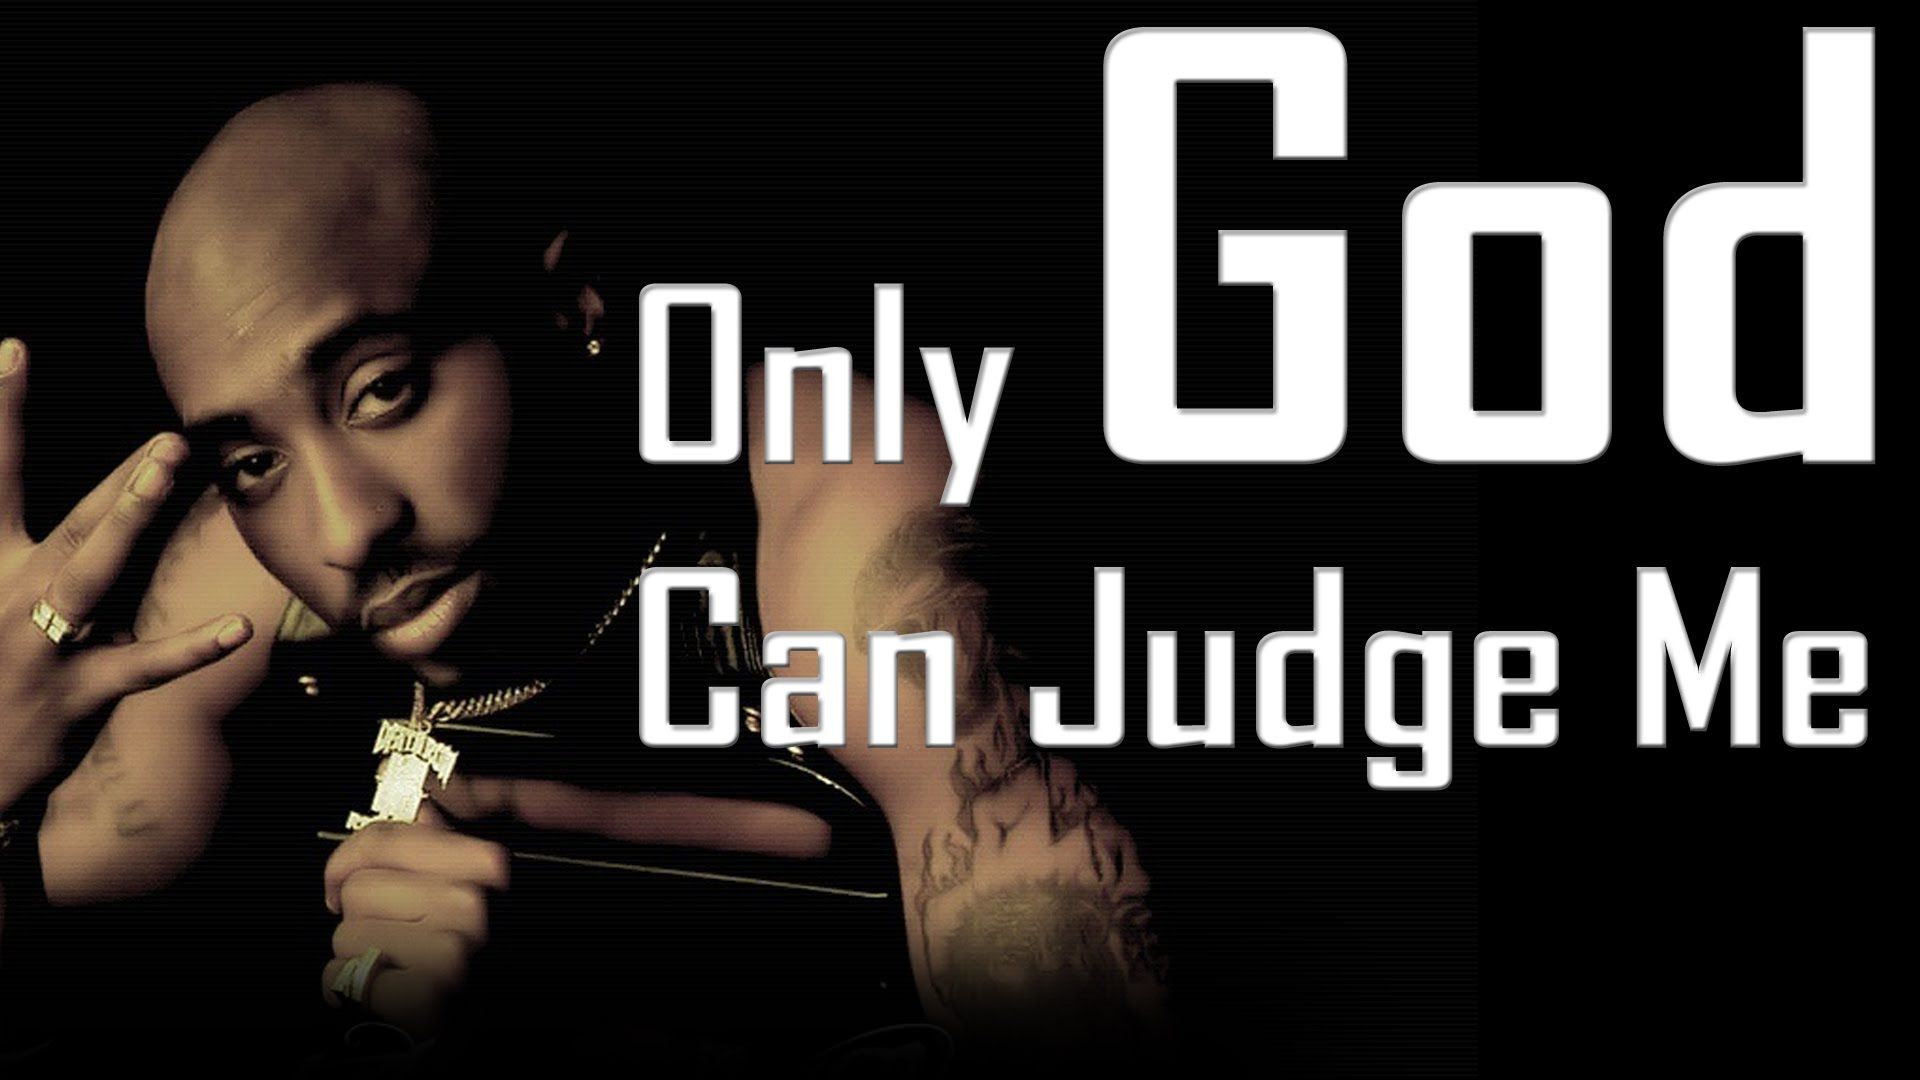 2pac only god can judge me album